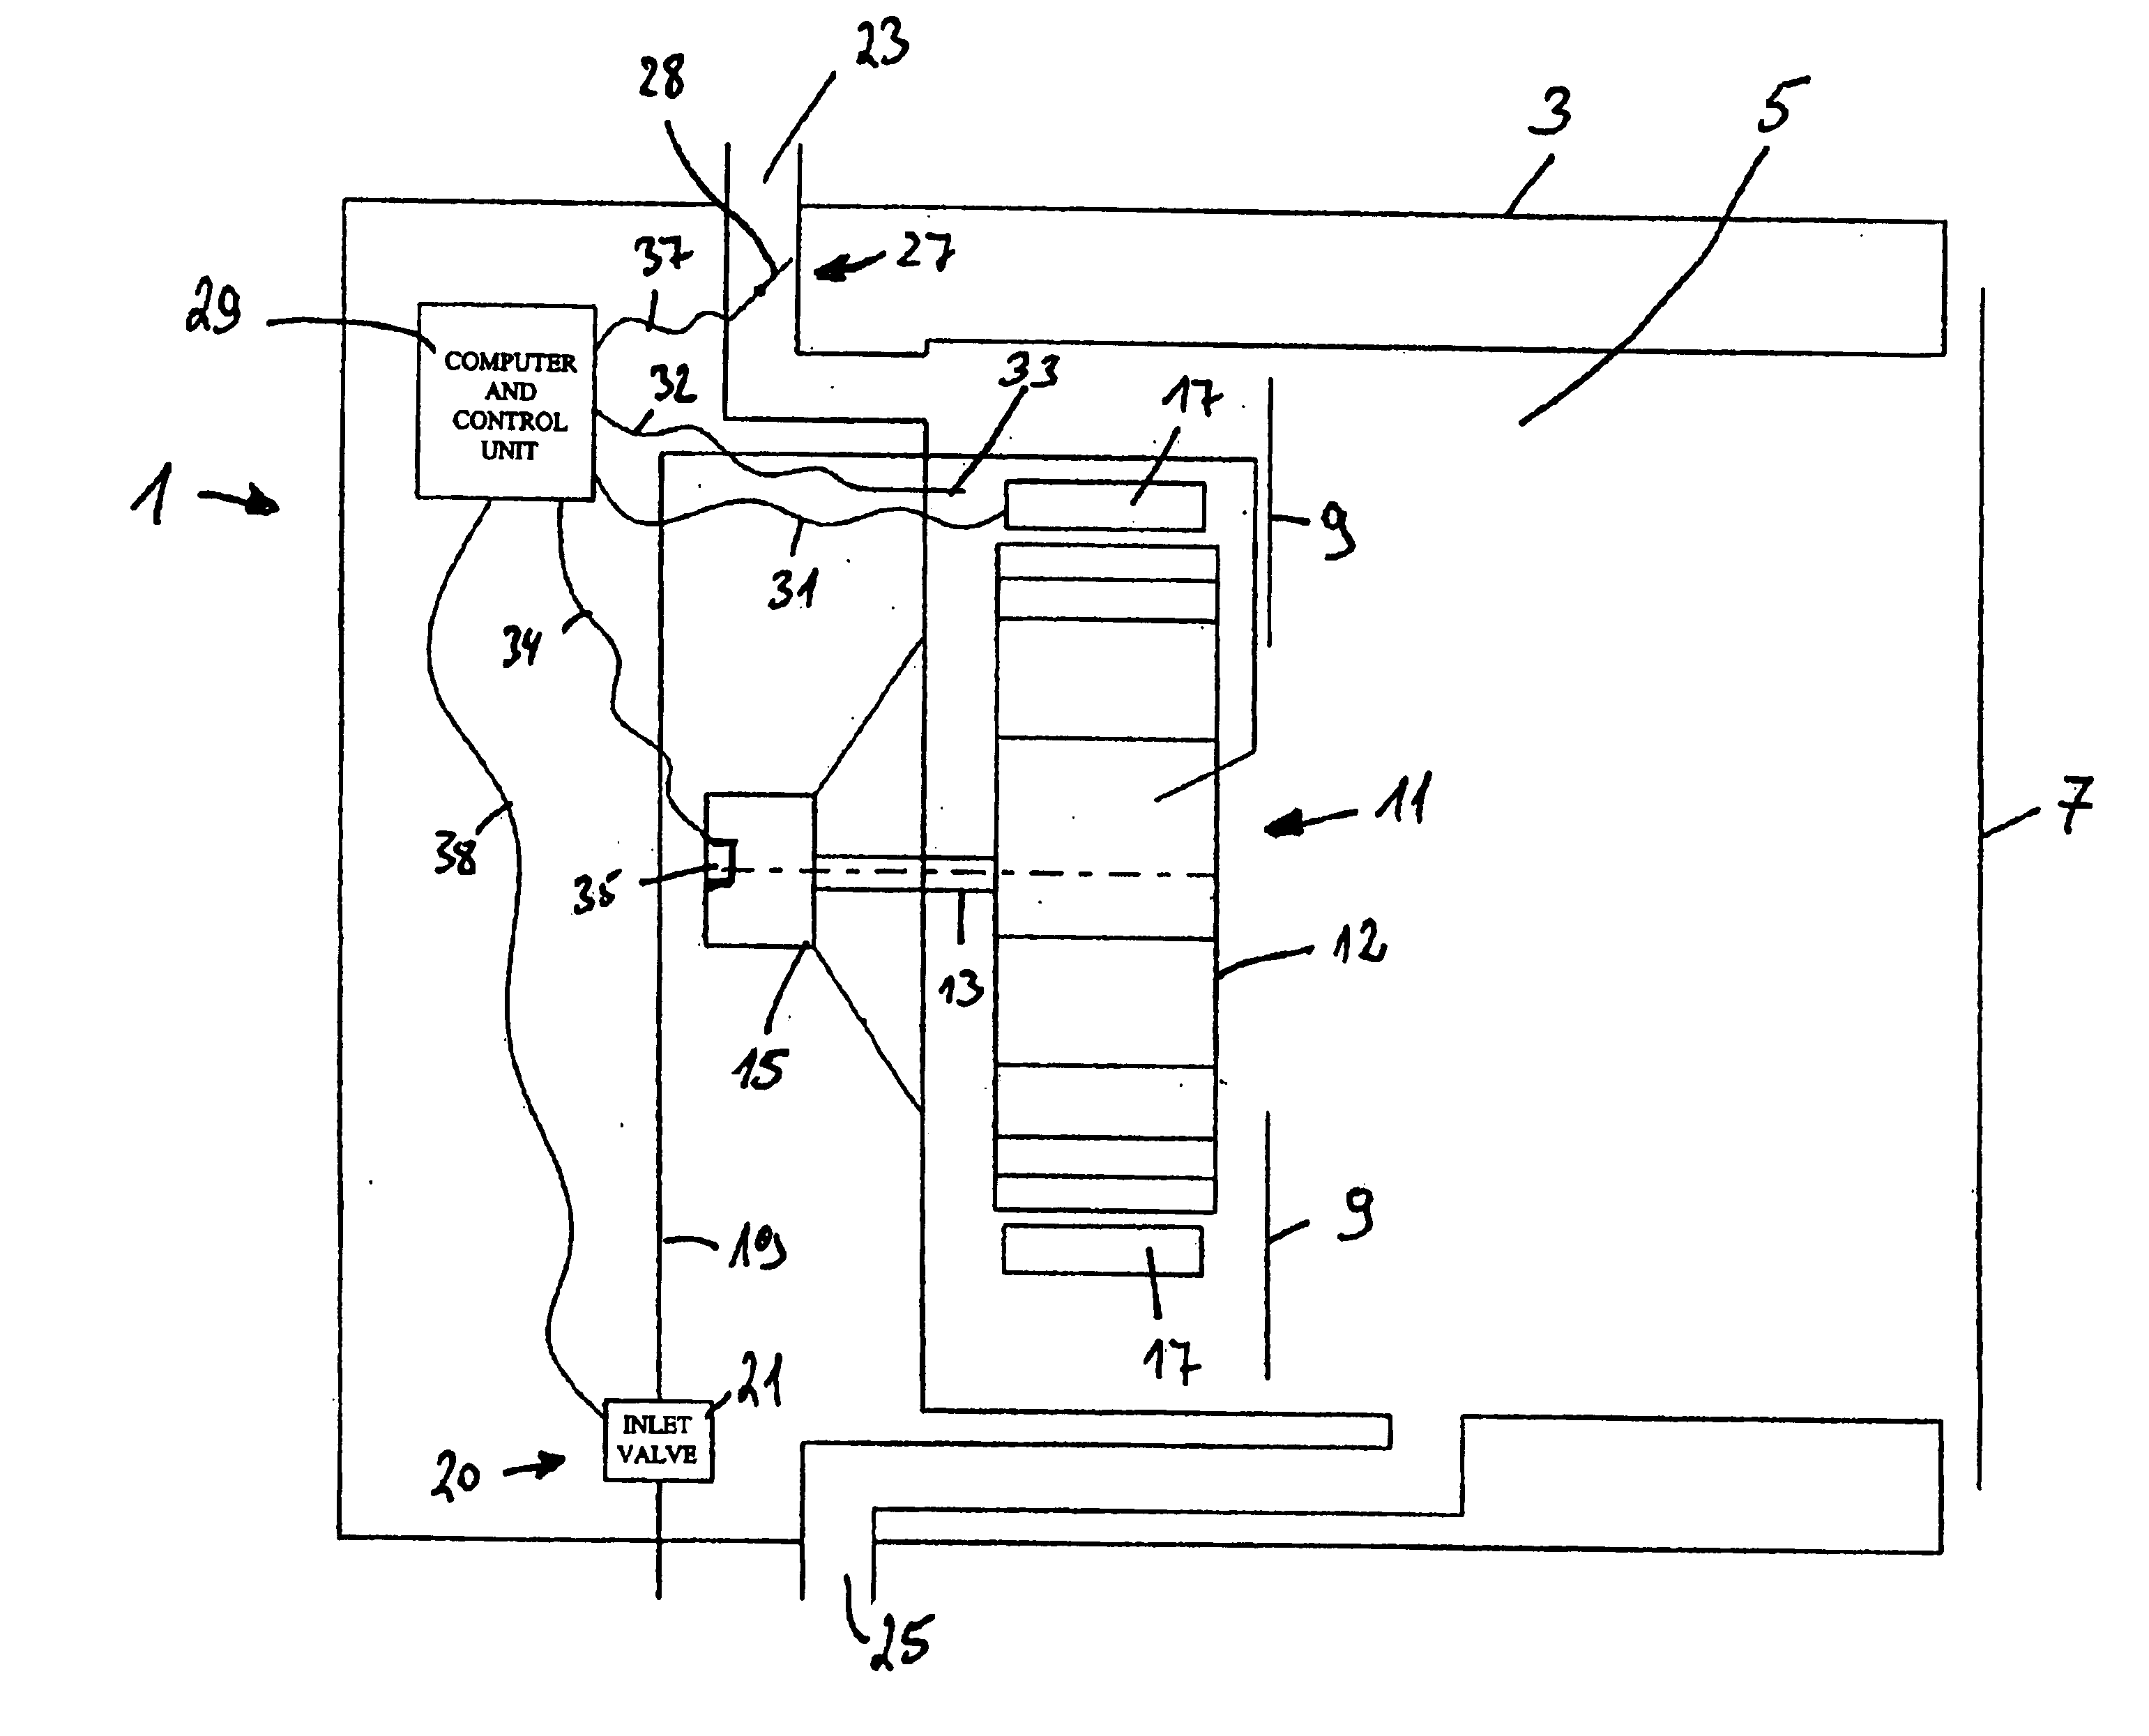 Method for detecting moisture level in apparatus for treating and preparing food and related food treatment and preparation apparatus